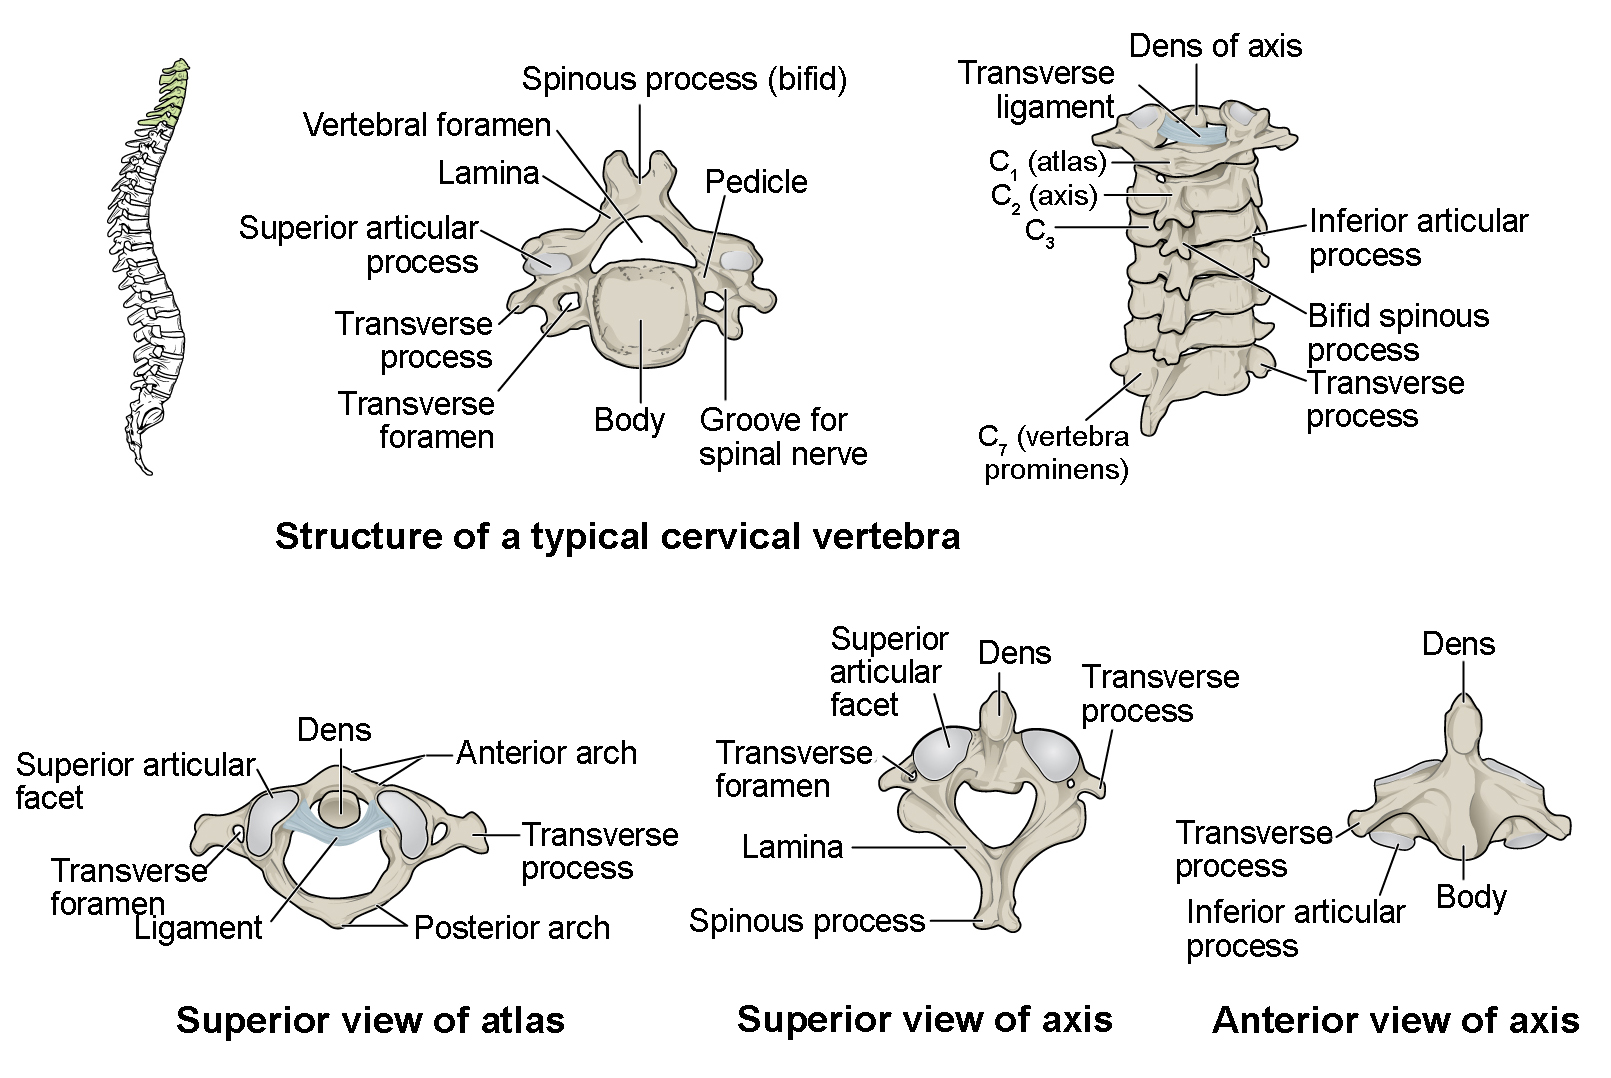 This figure shows the structure of the cervical vertebrae. The left panel shows the location of the cervical vertebrae in green along the vertebral column. The middle panel shows the structure of a typical cervical vertebra and the right panel shows the superior and anterior view of the axis.